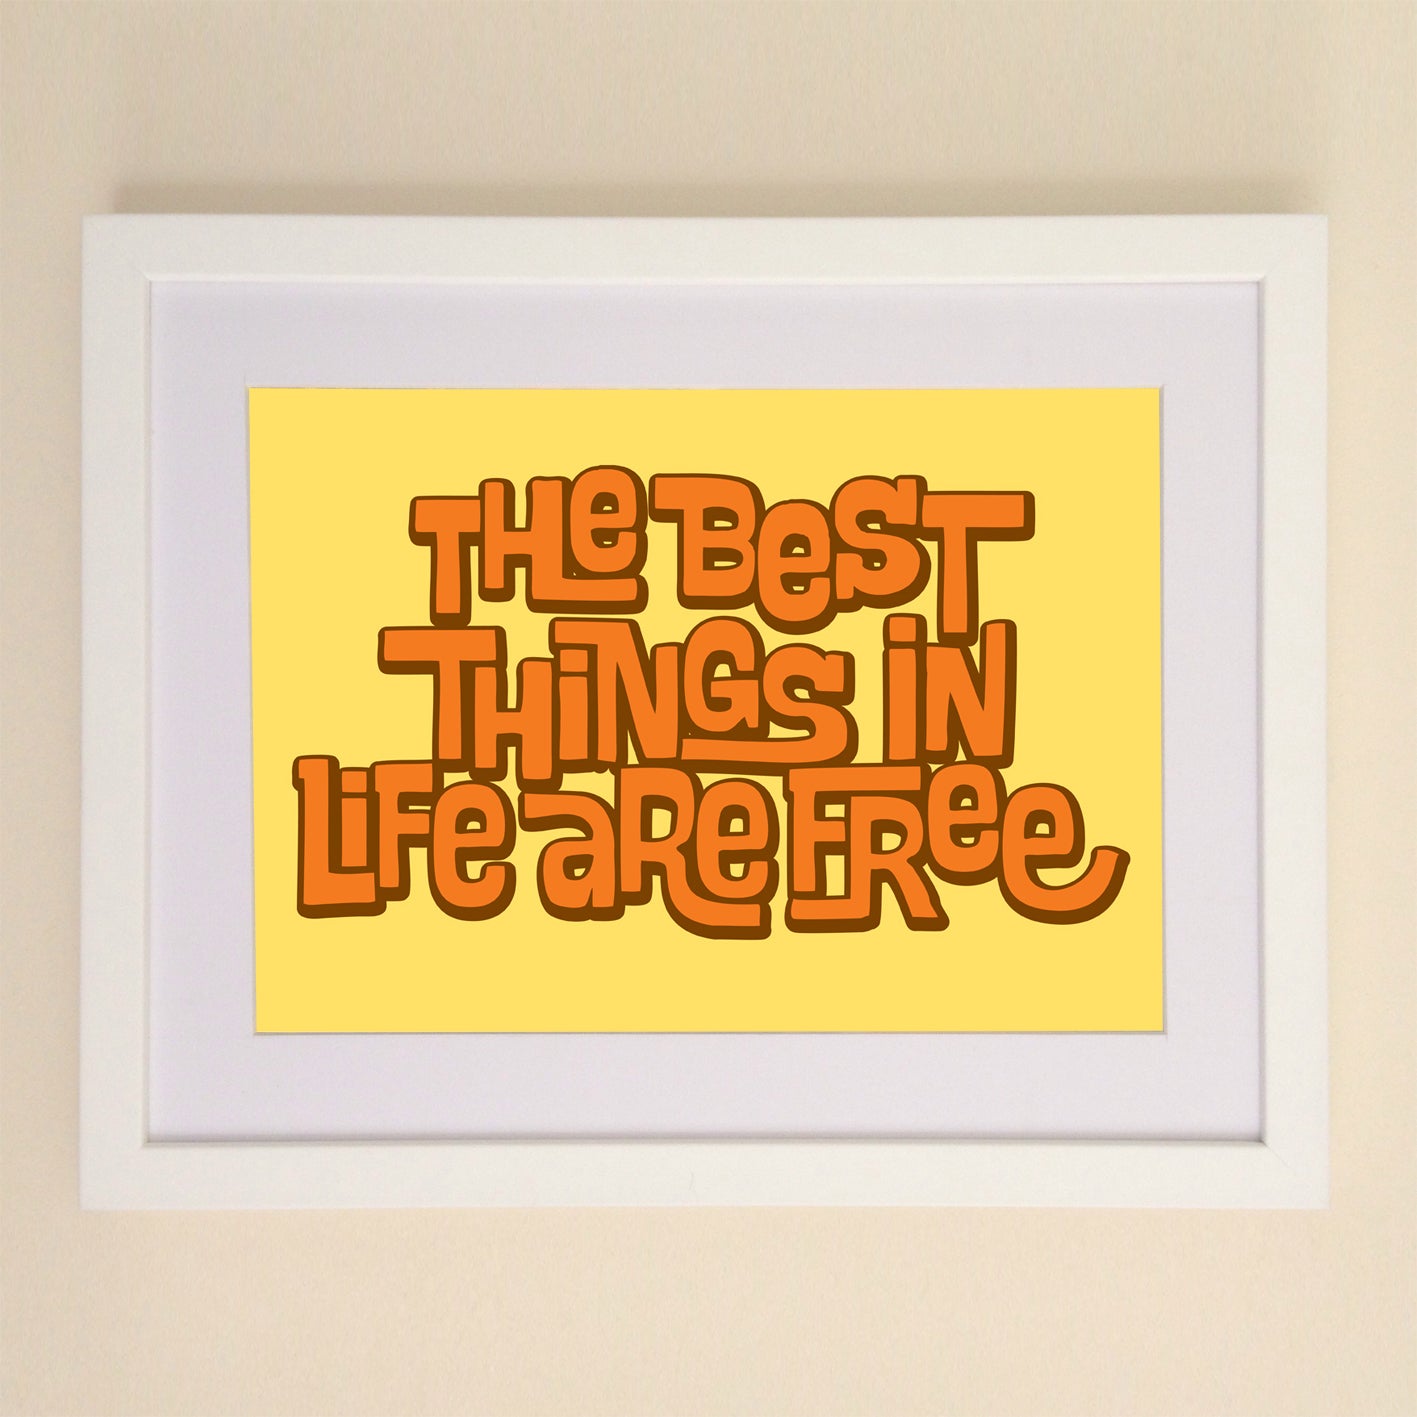 The Best Things In Life Are Free A4, A3 or 50cm x 70cm print